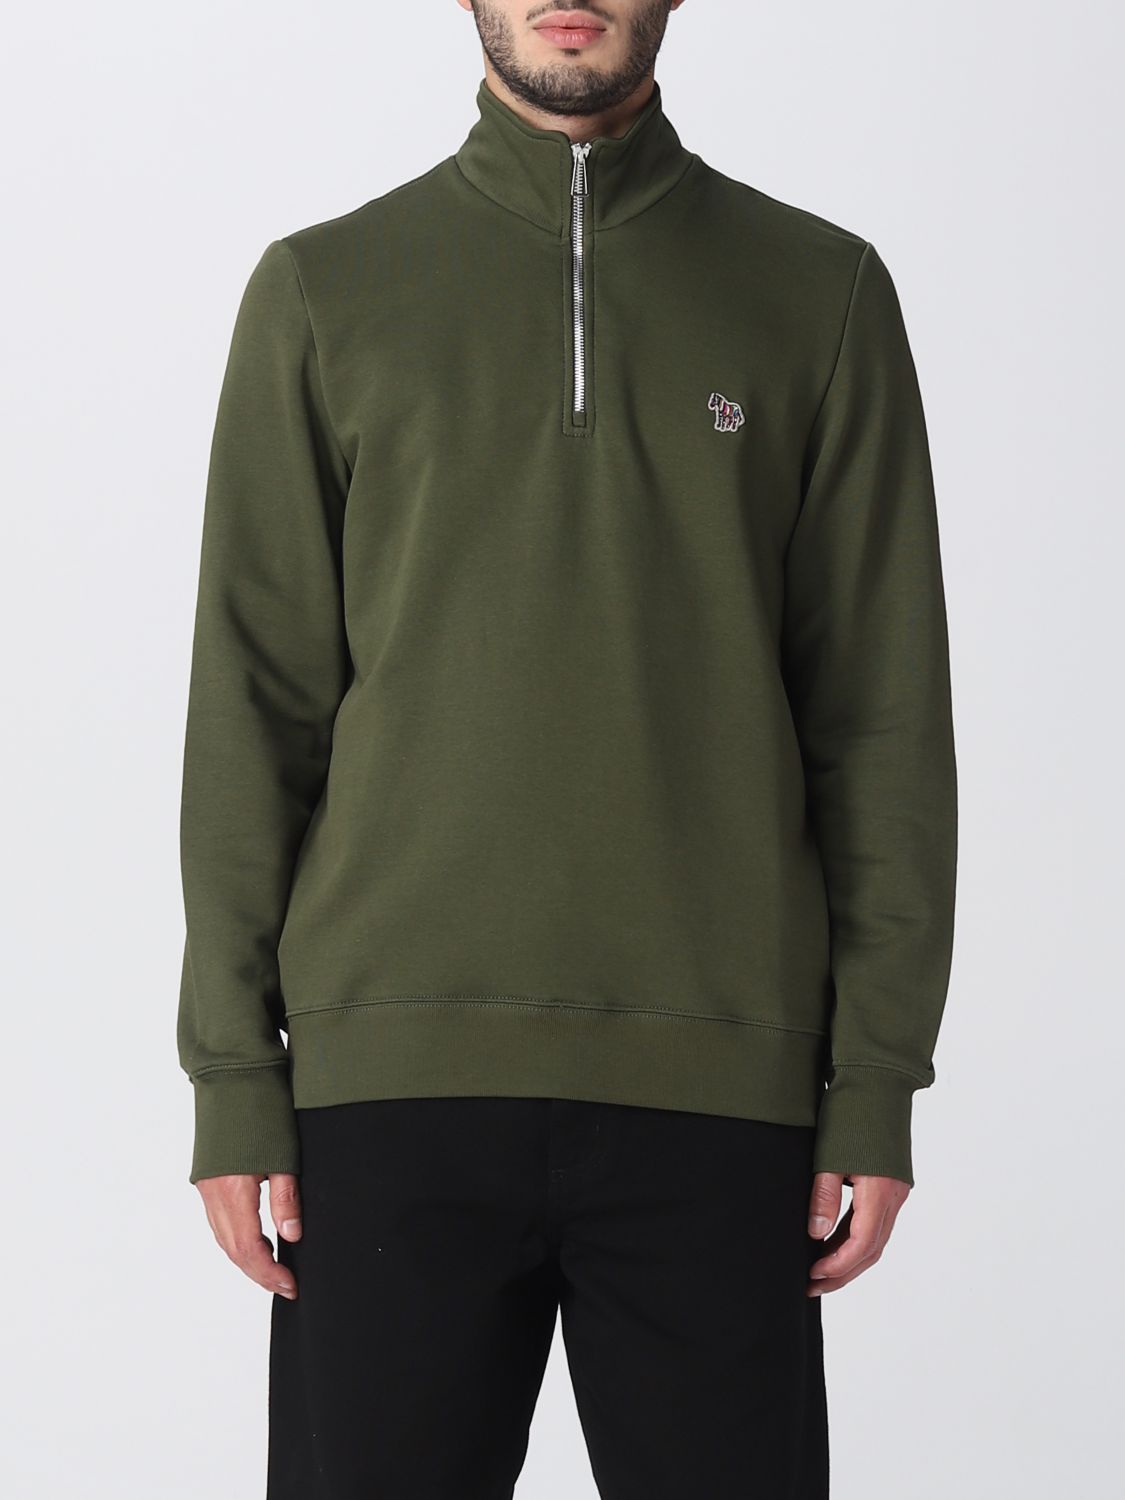 Shop Ps By Paul Smith Sweatshirt Ps Paul Smith Men Color Military